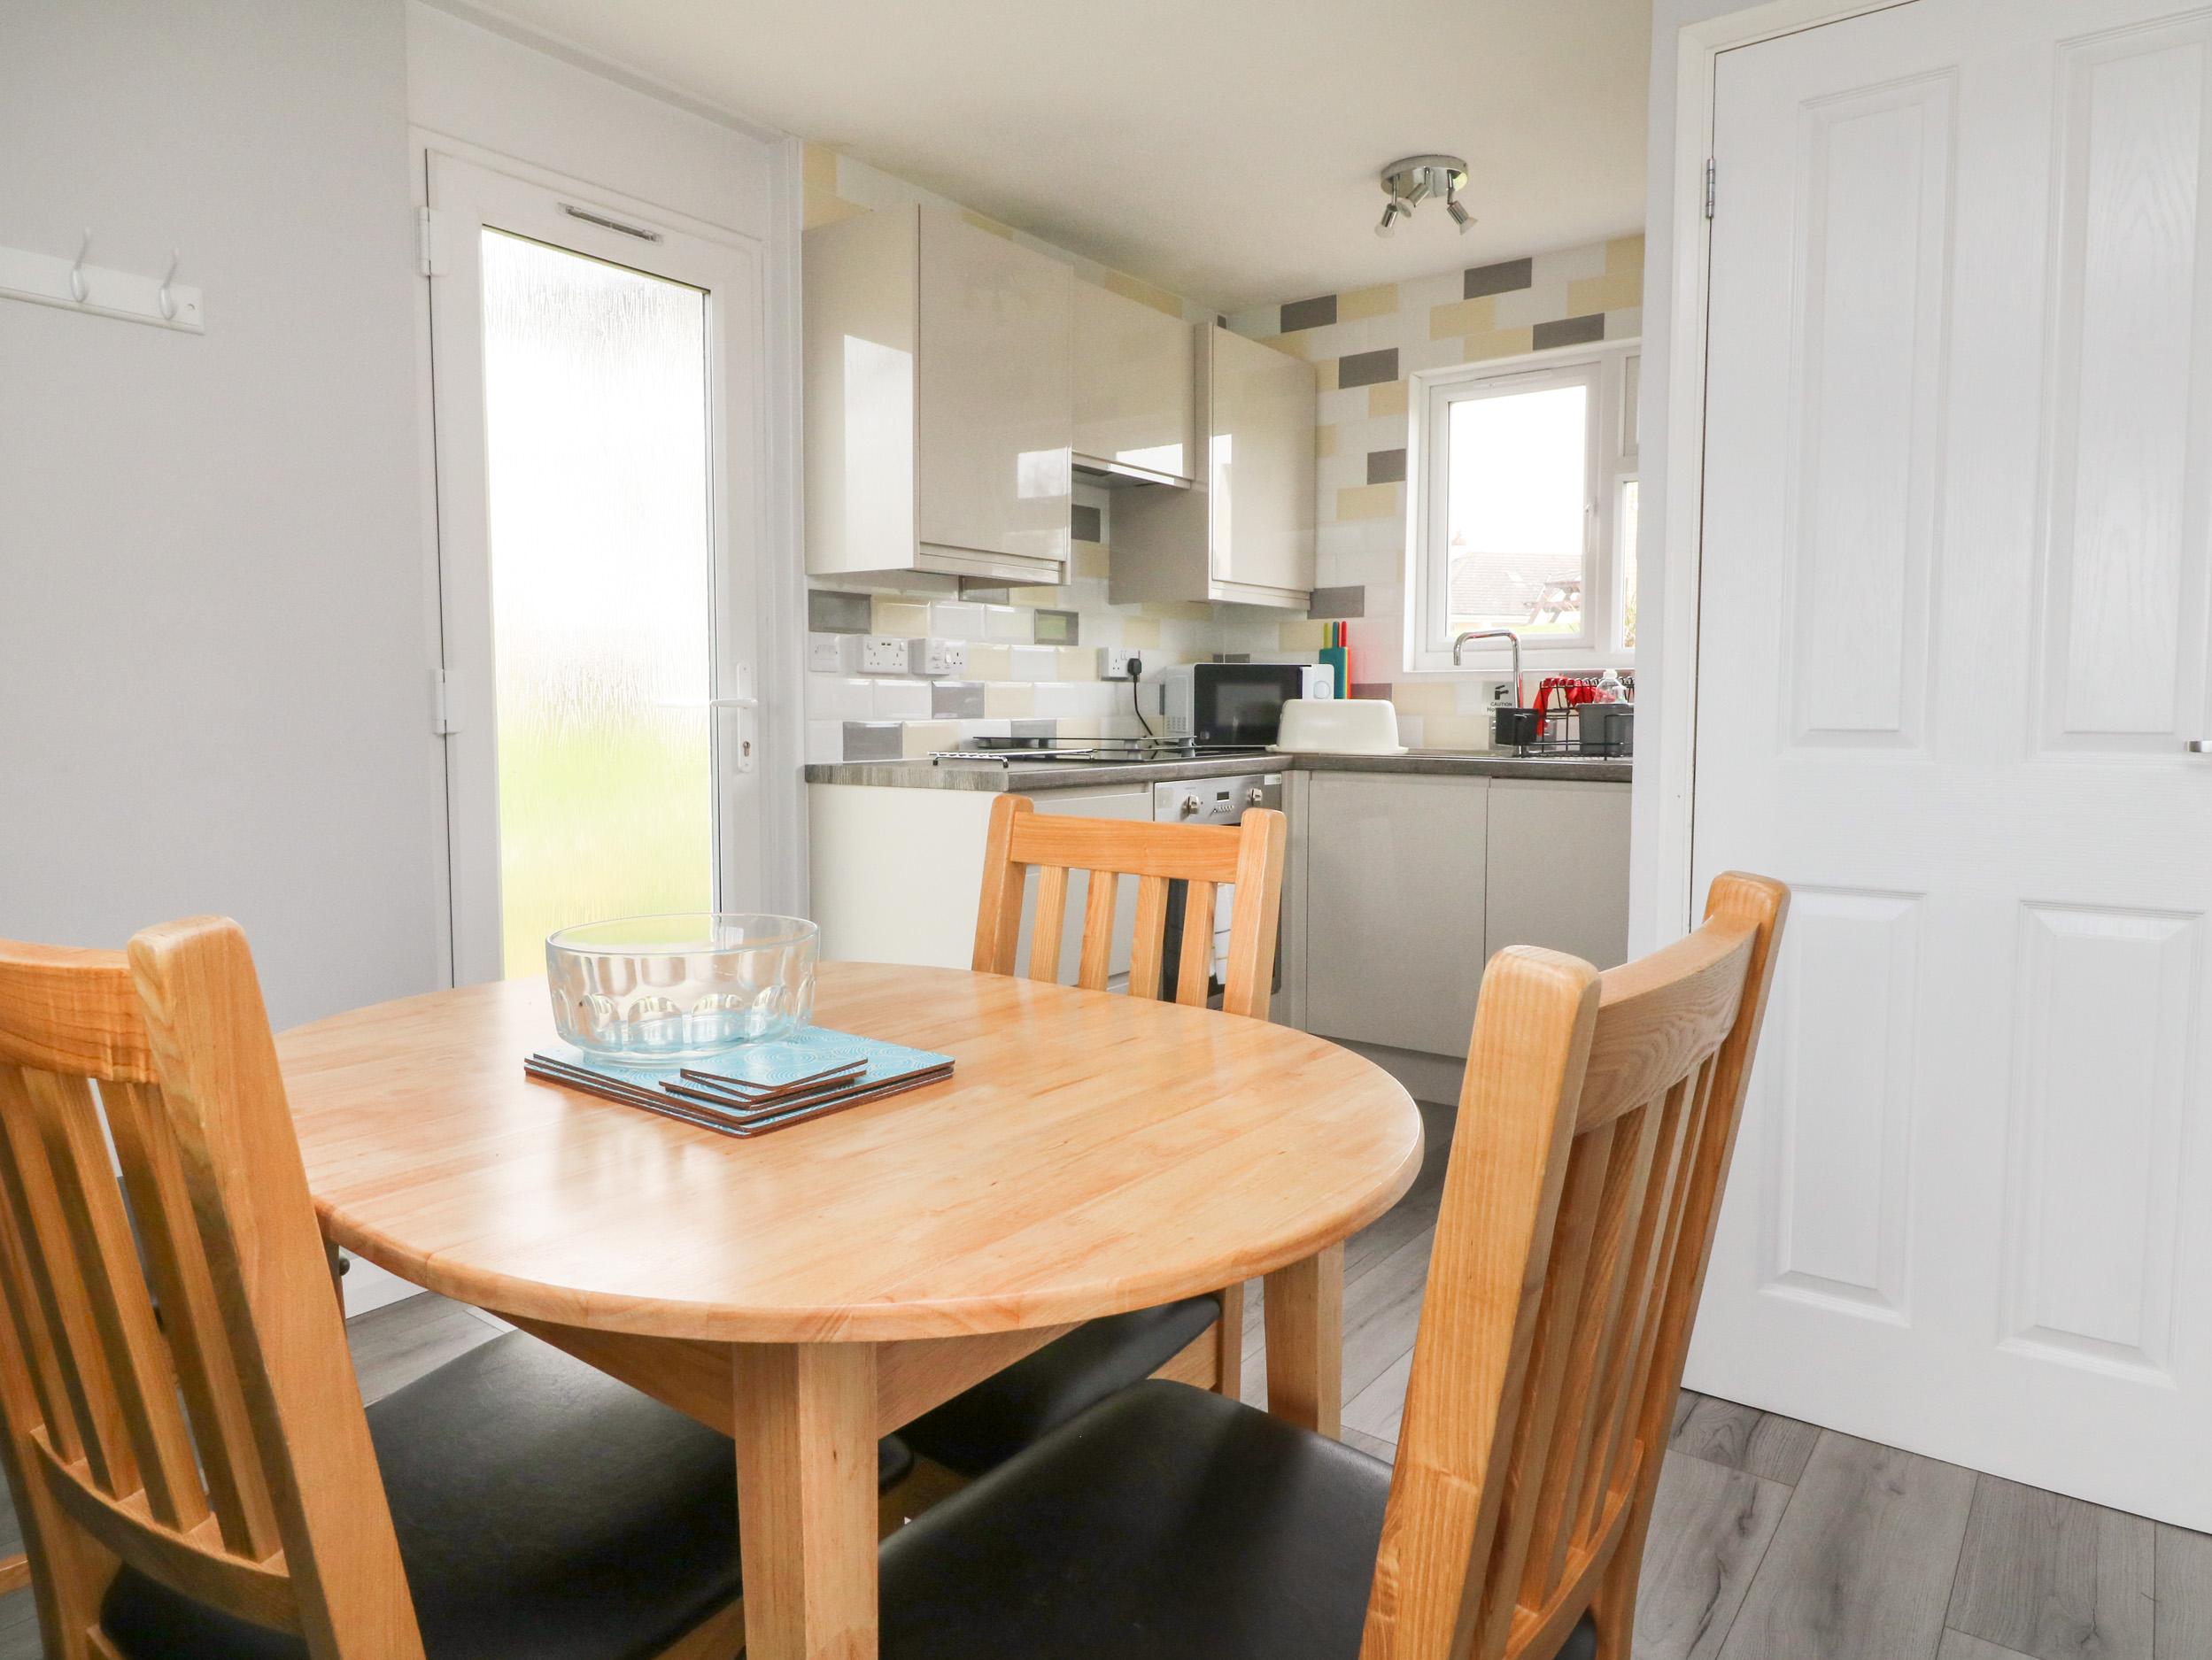 Holiday Cottage Reviews for 16 Hillside - Self Catering Property in Bude, Cornwall Inc Scilly